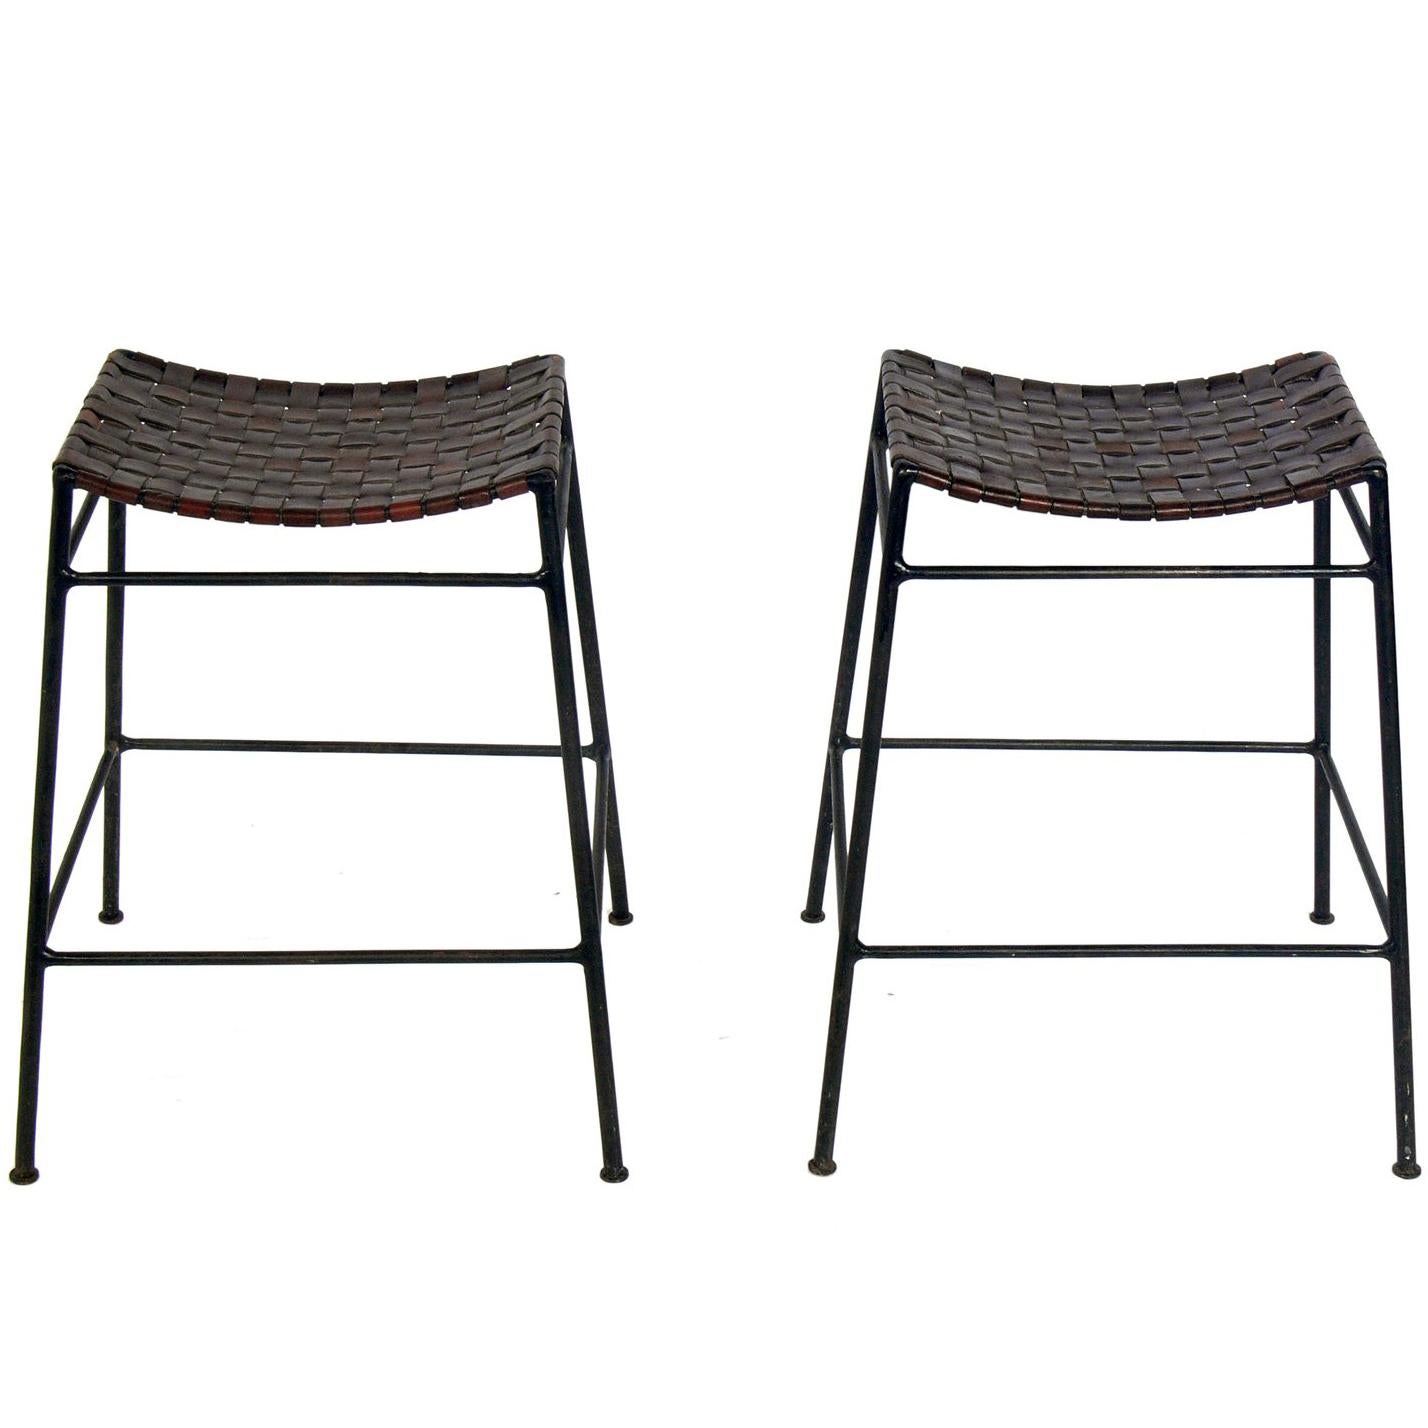 Pair of Woven Leather and Iron Bar Stools